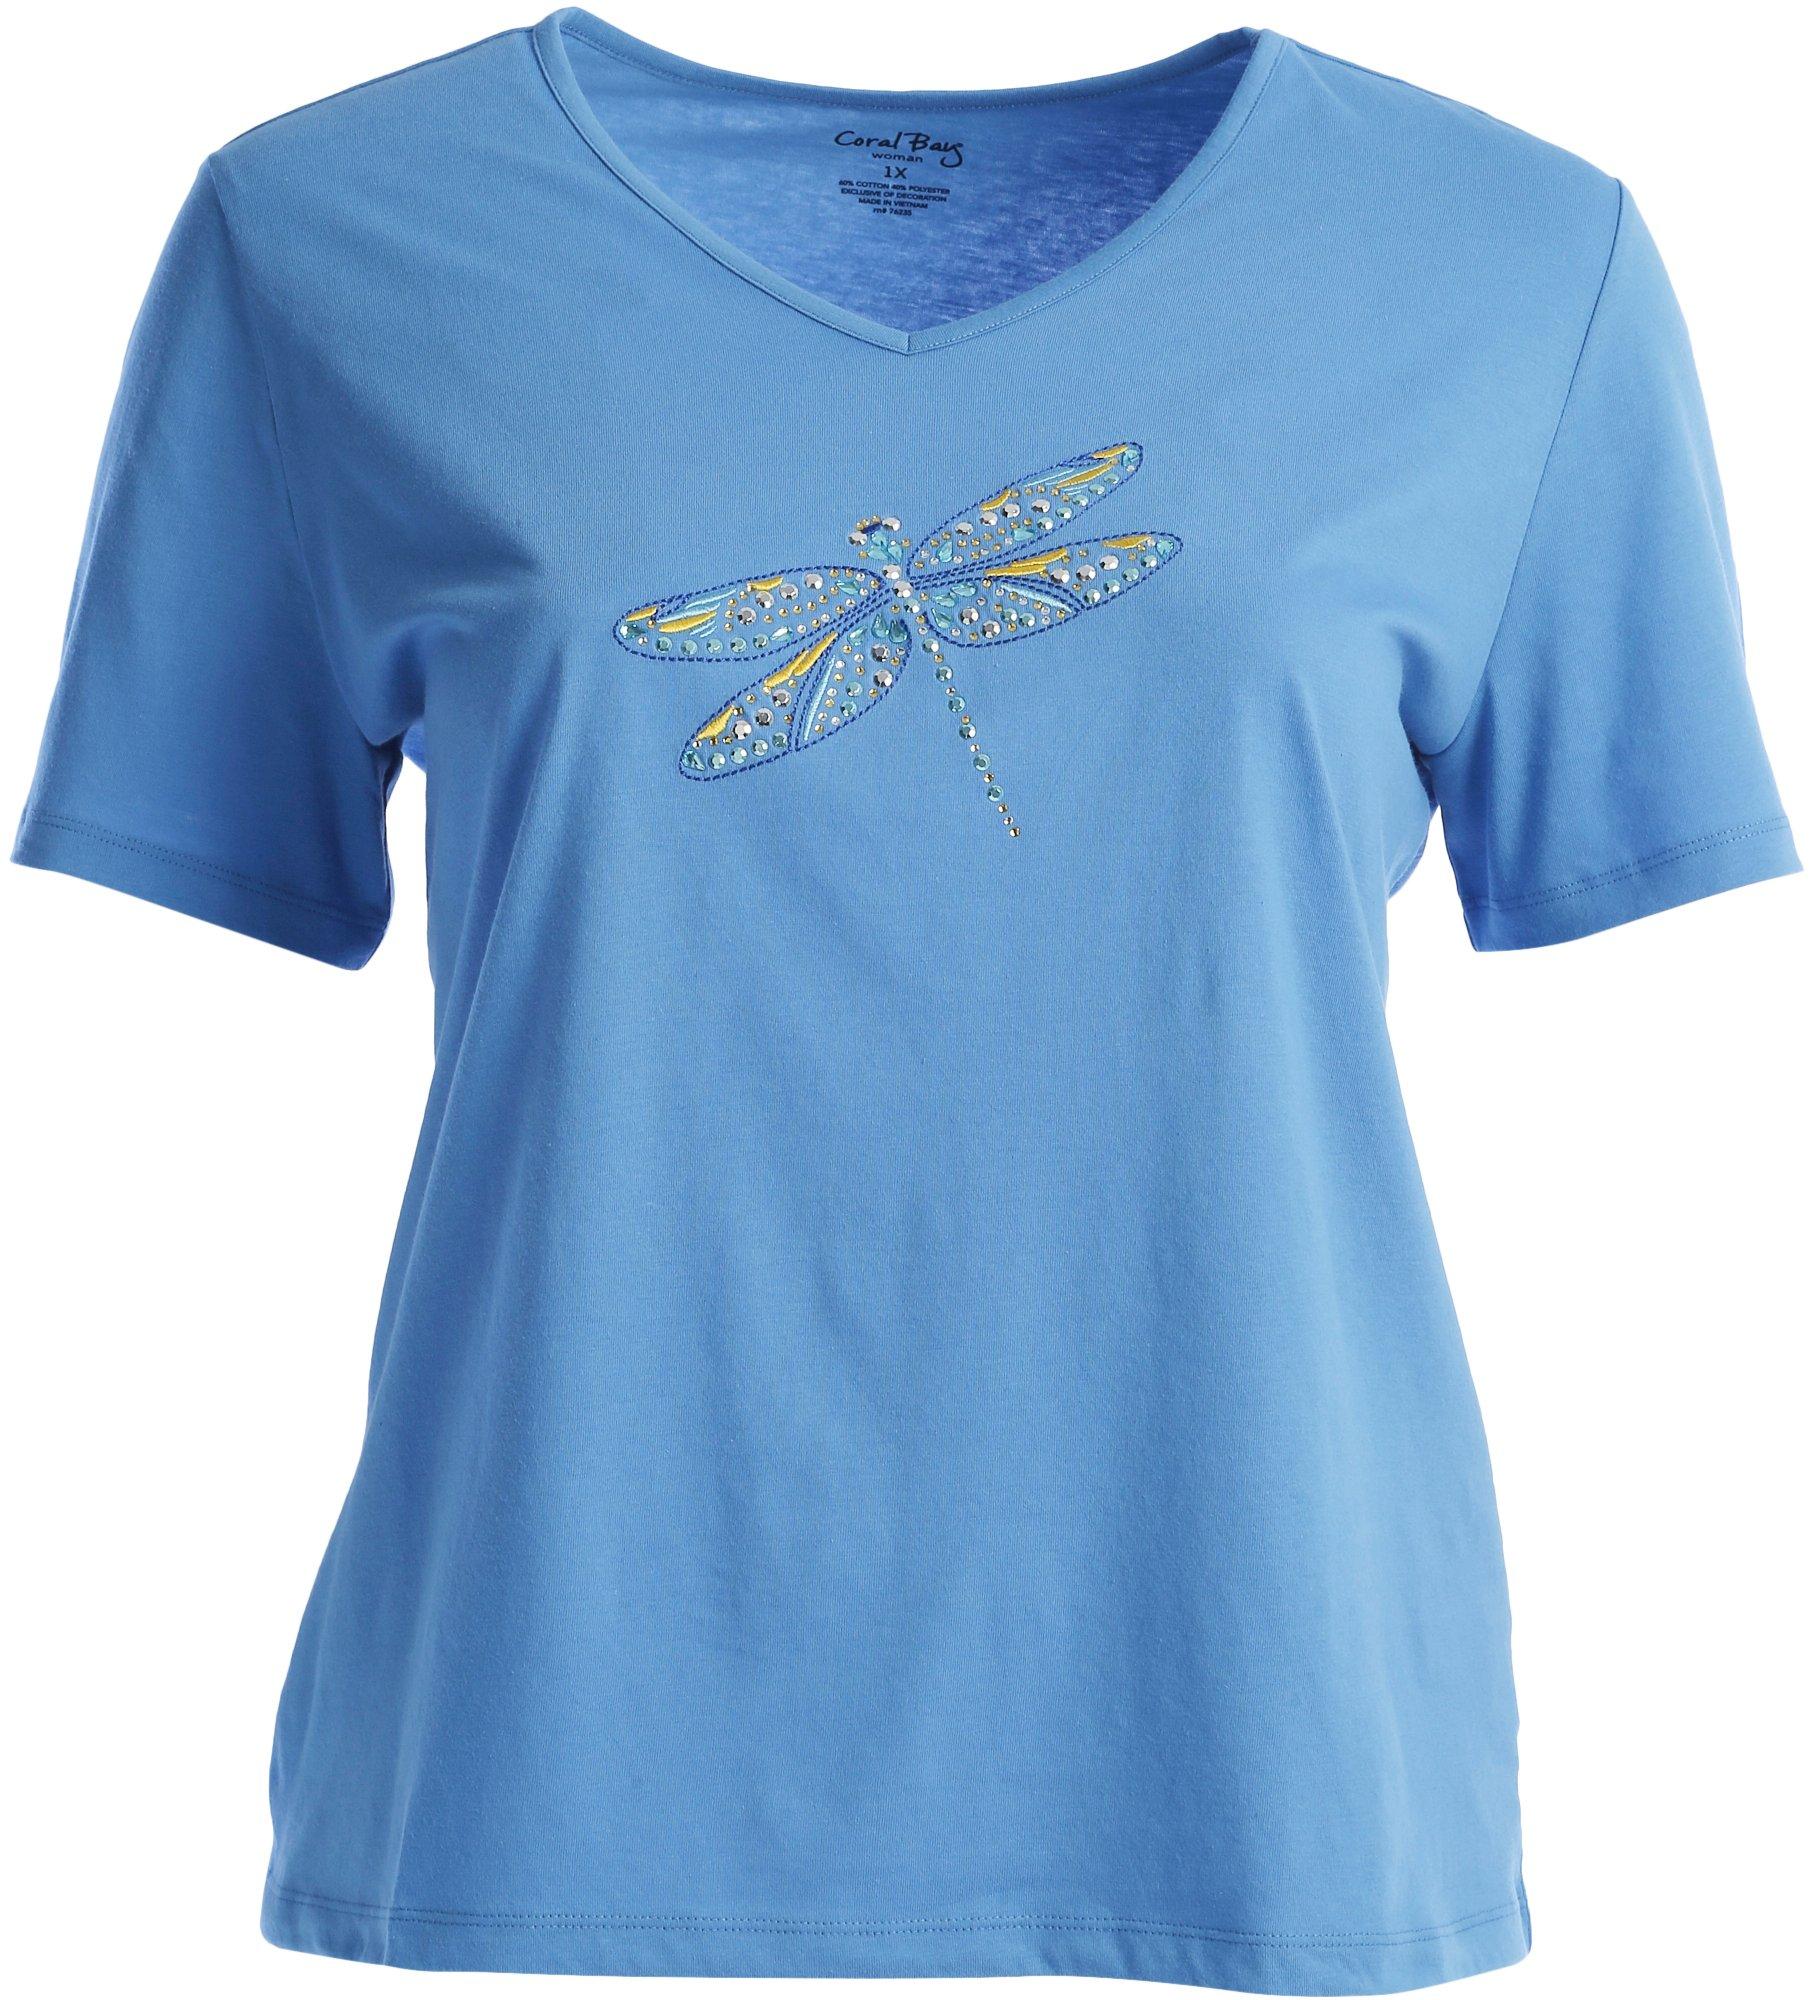 Plus Embroidered Dragonfly Short Sleeve Top